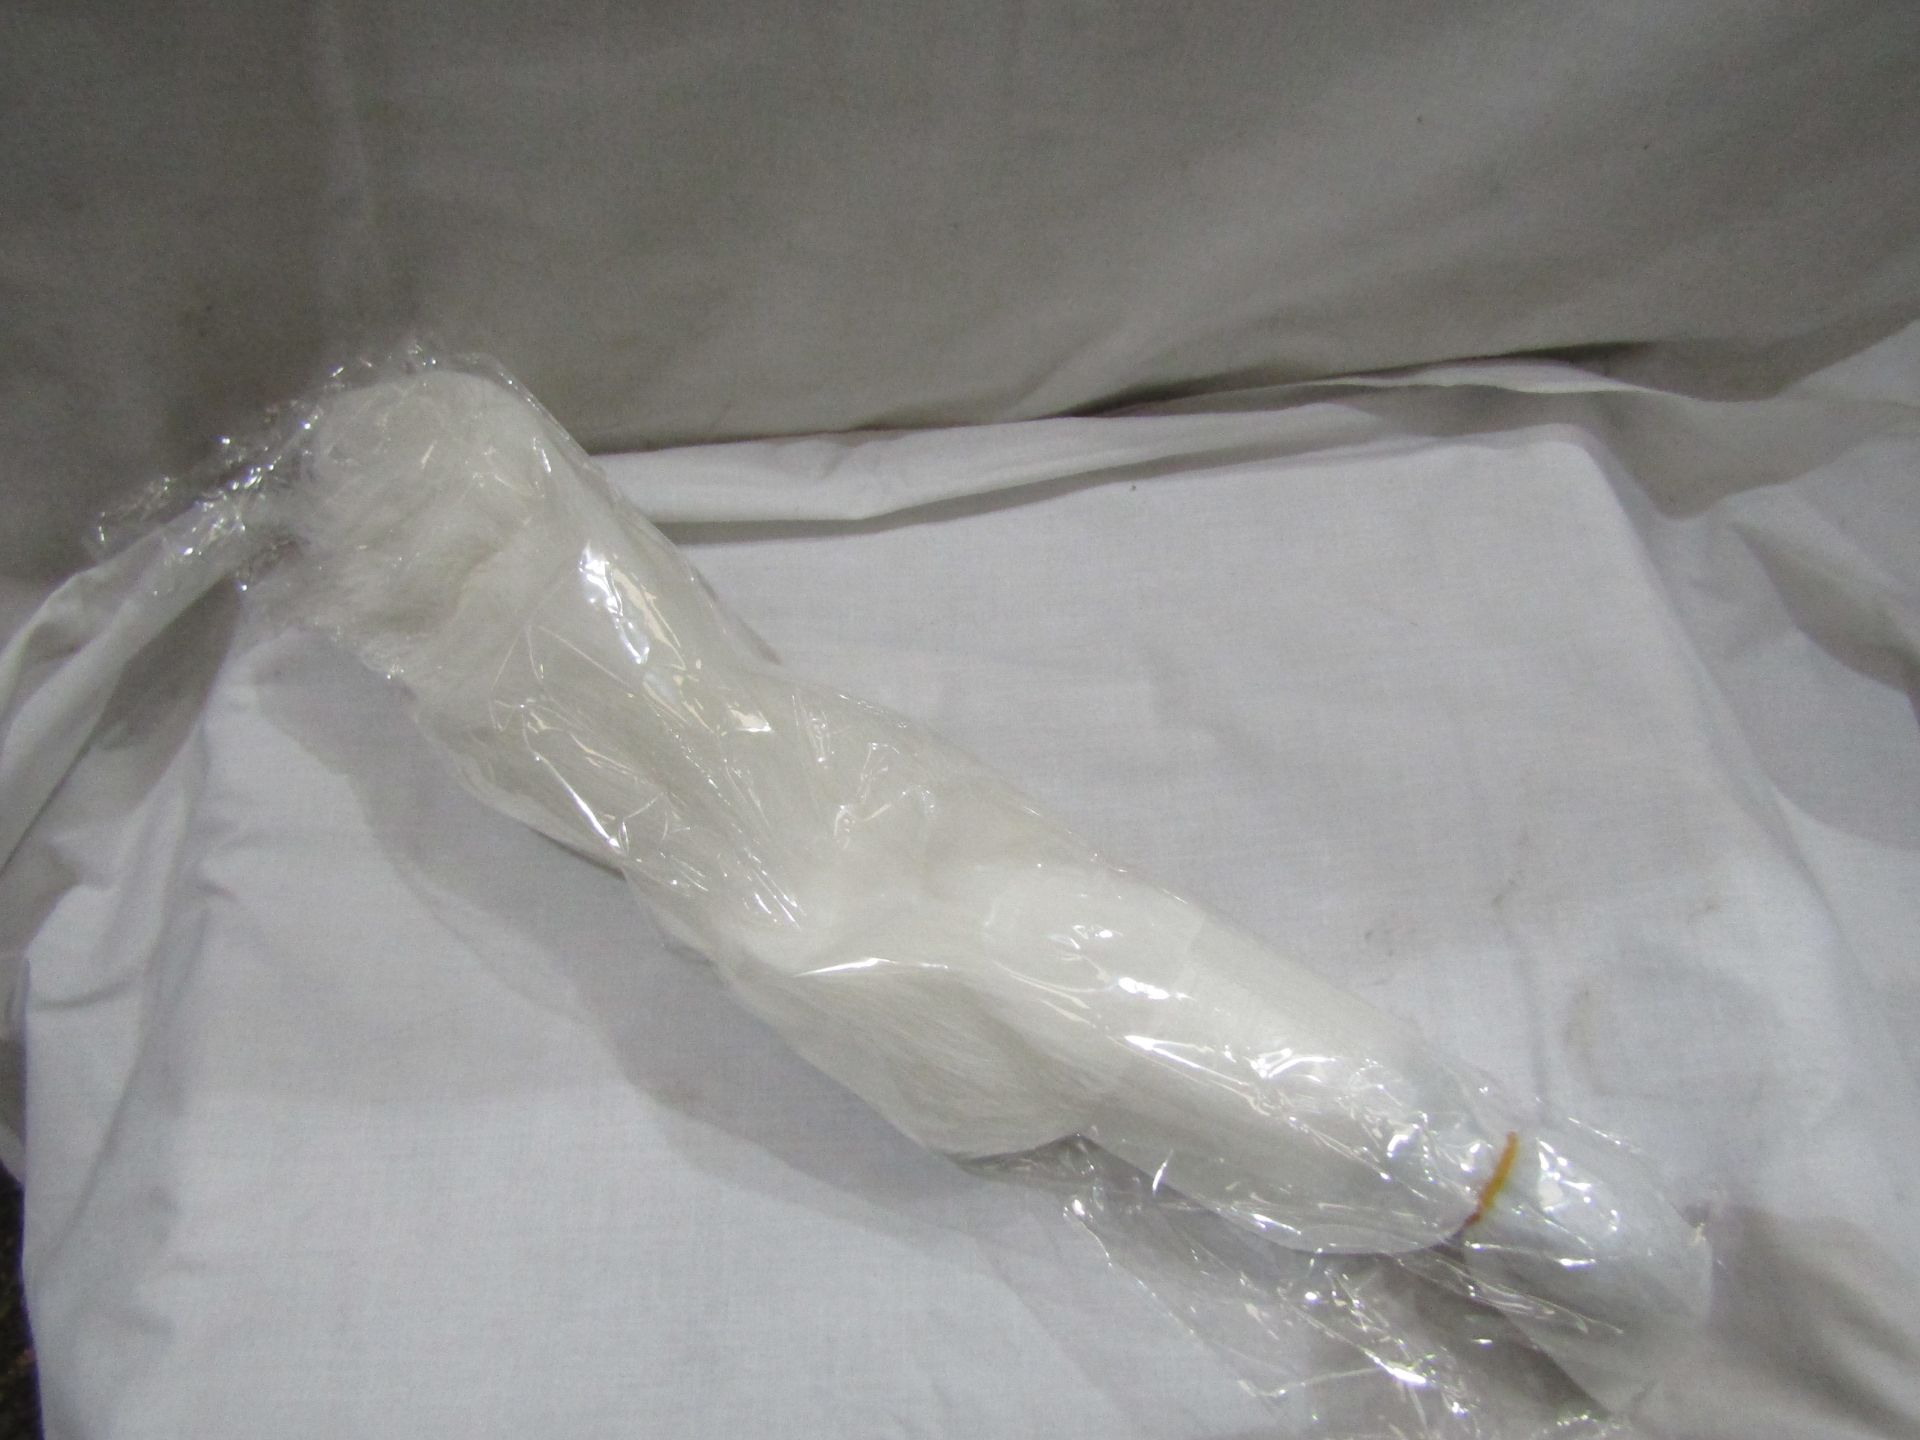 White Tail Butt Plug Toy - New.